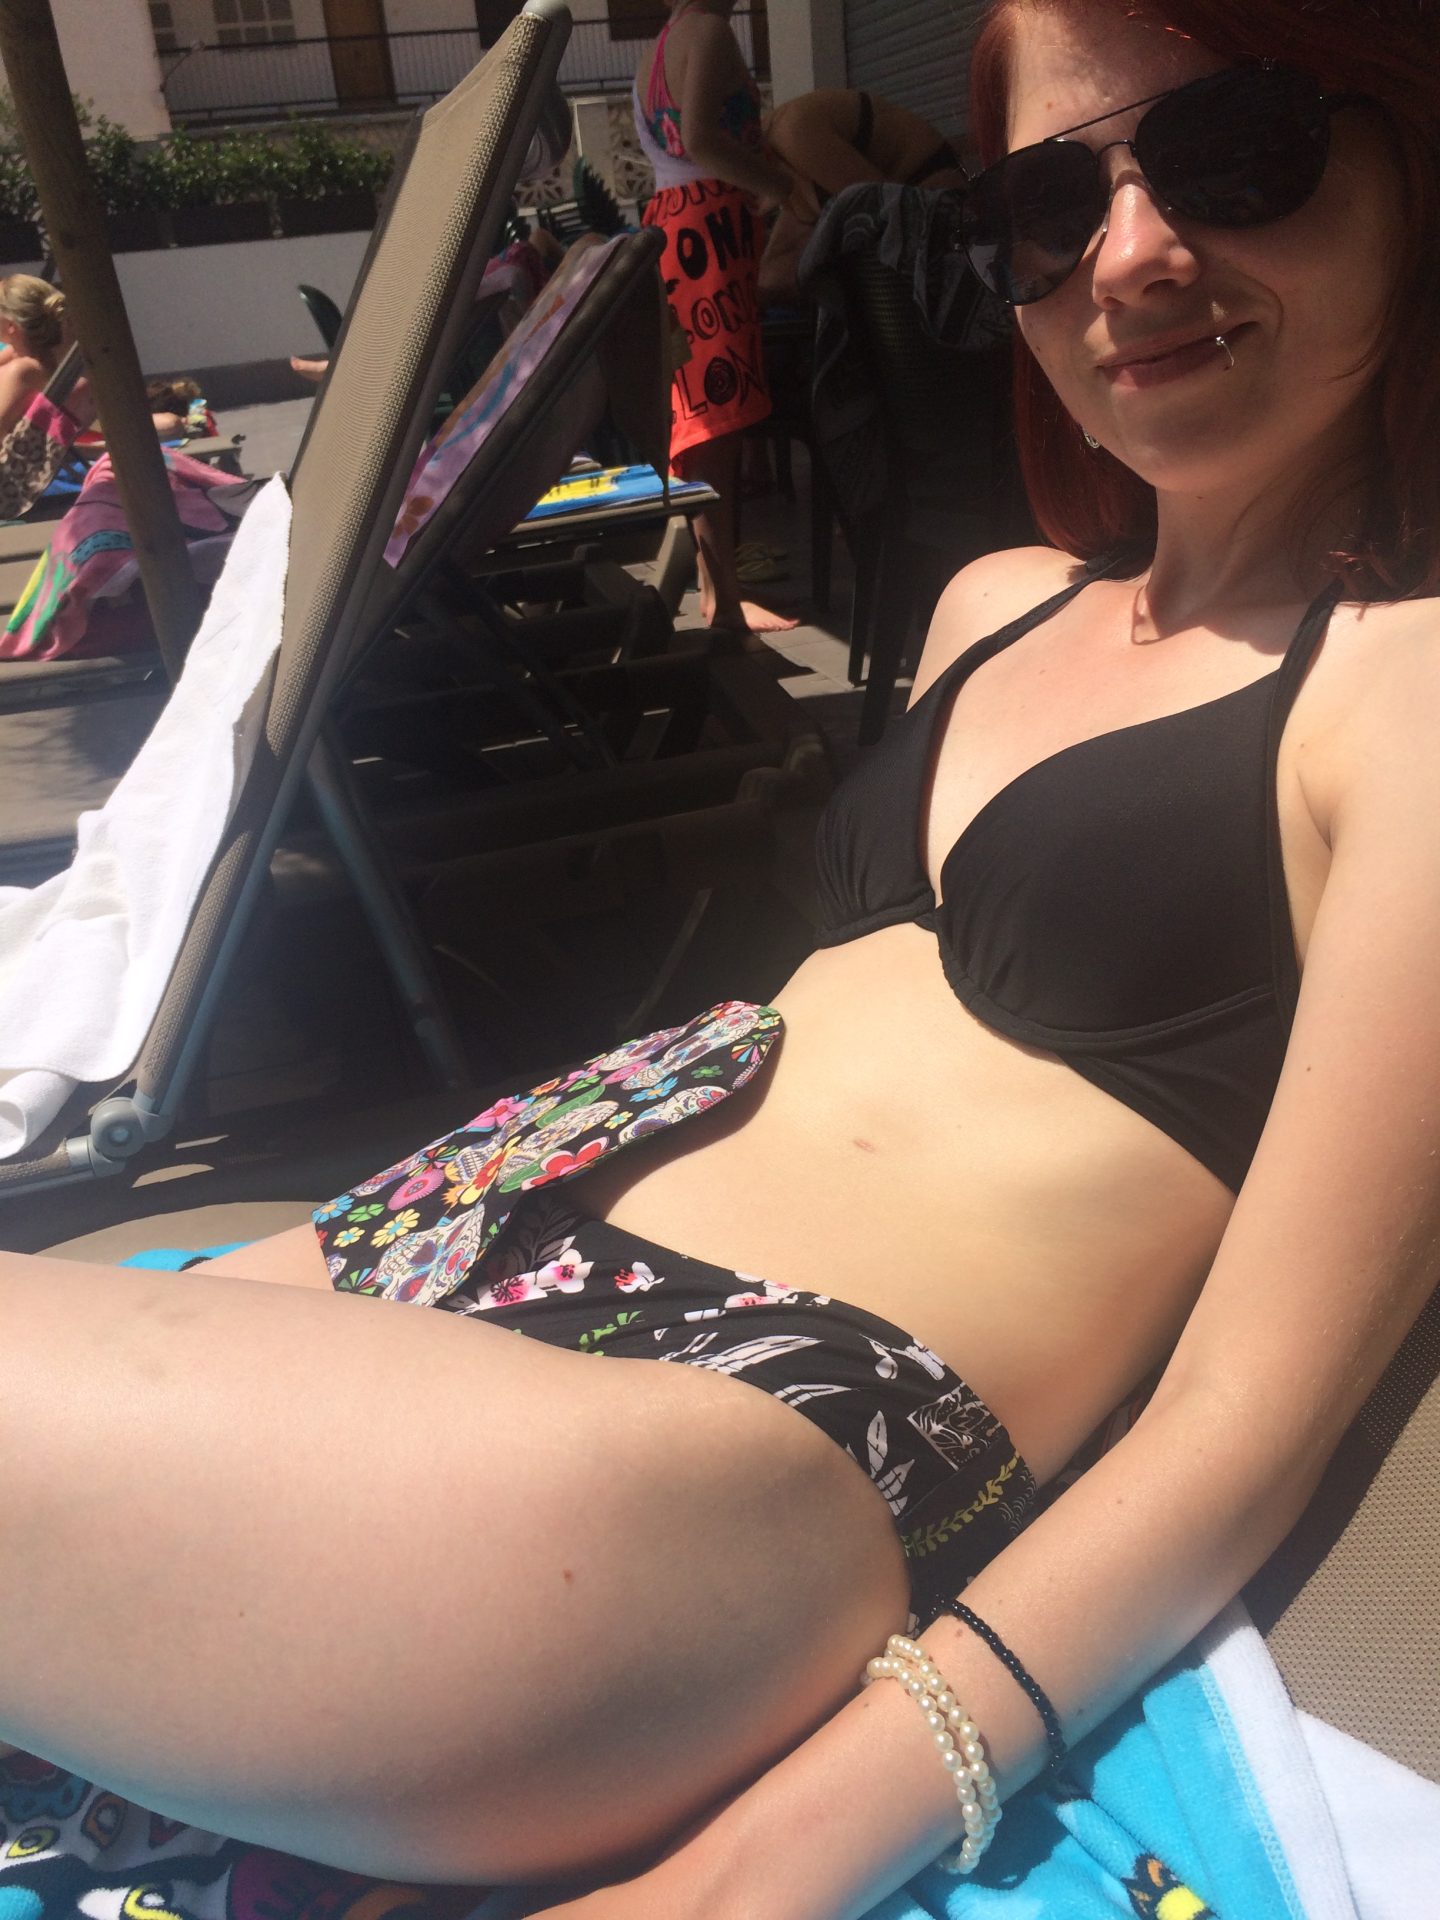 A photo of me reclining on a sun lounger wearing a black bikini, sunglasses and a sugar skull patterned stoma bag cover.